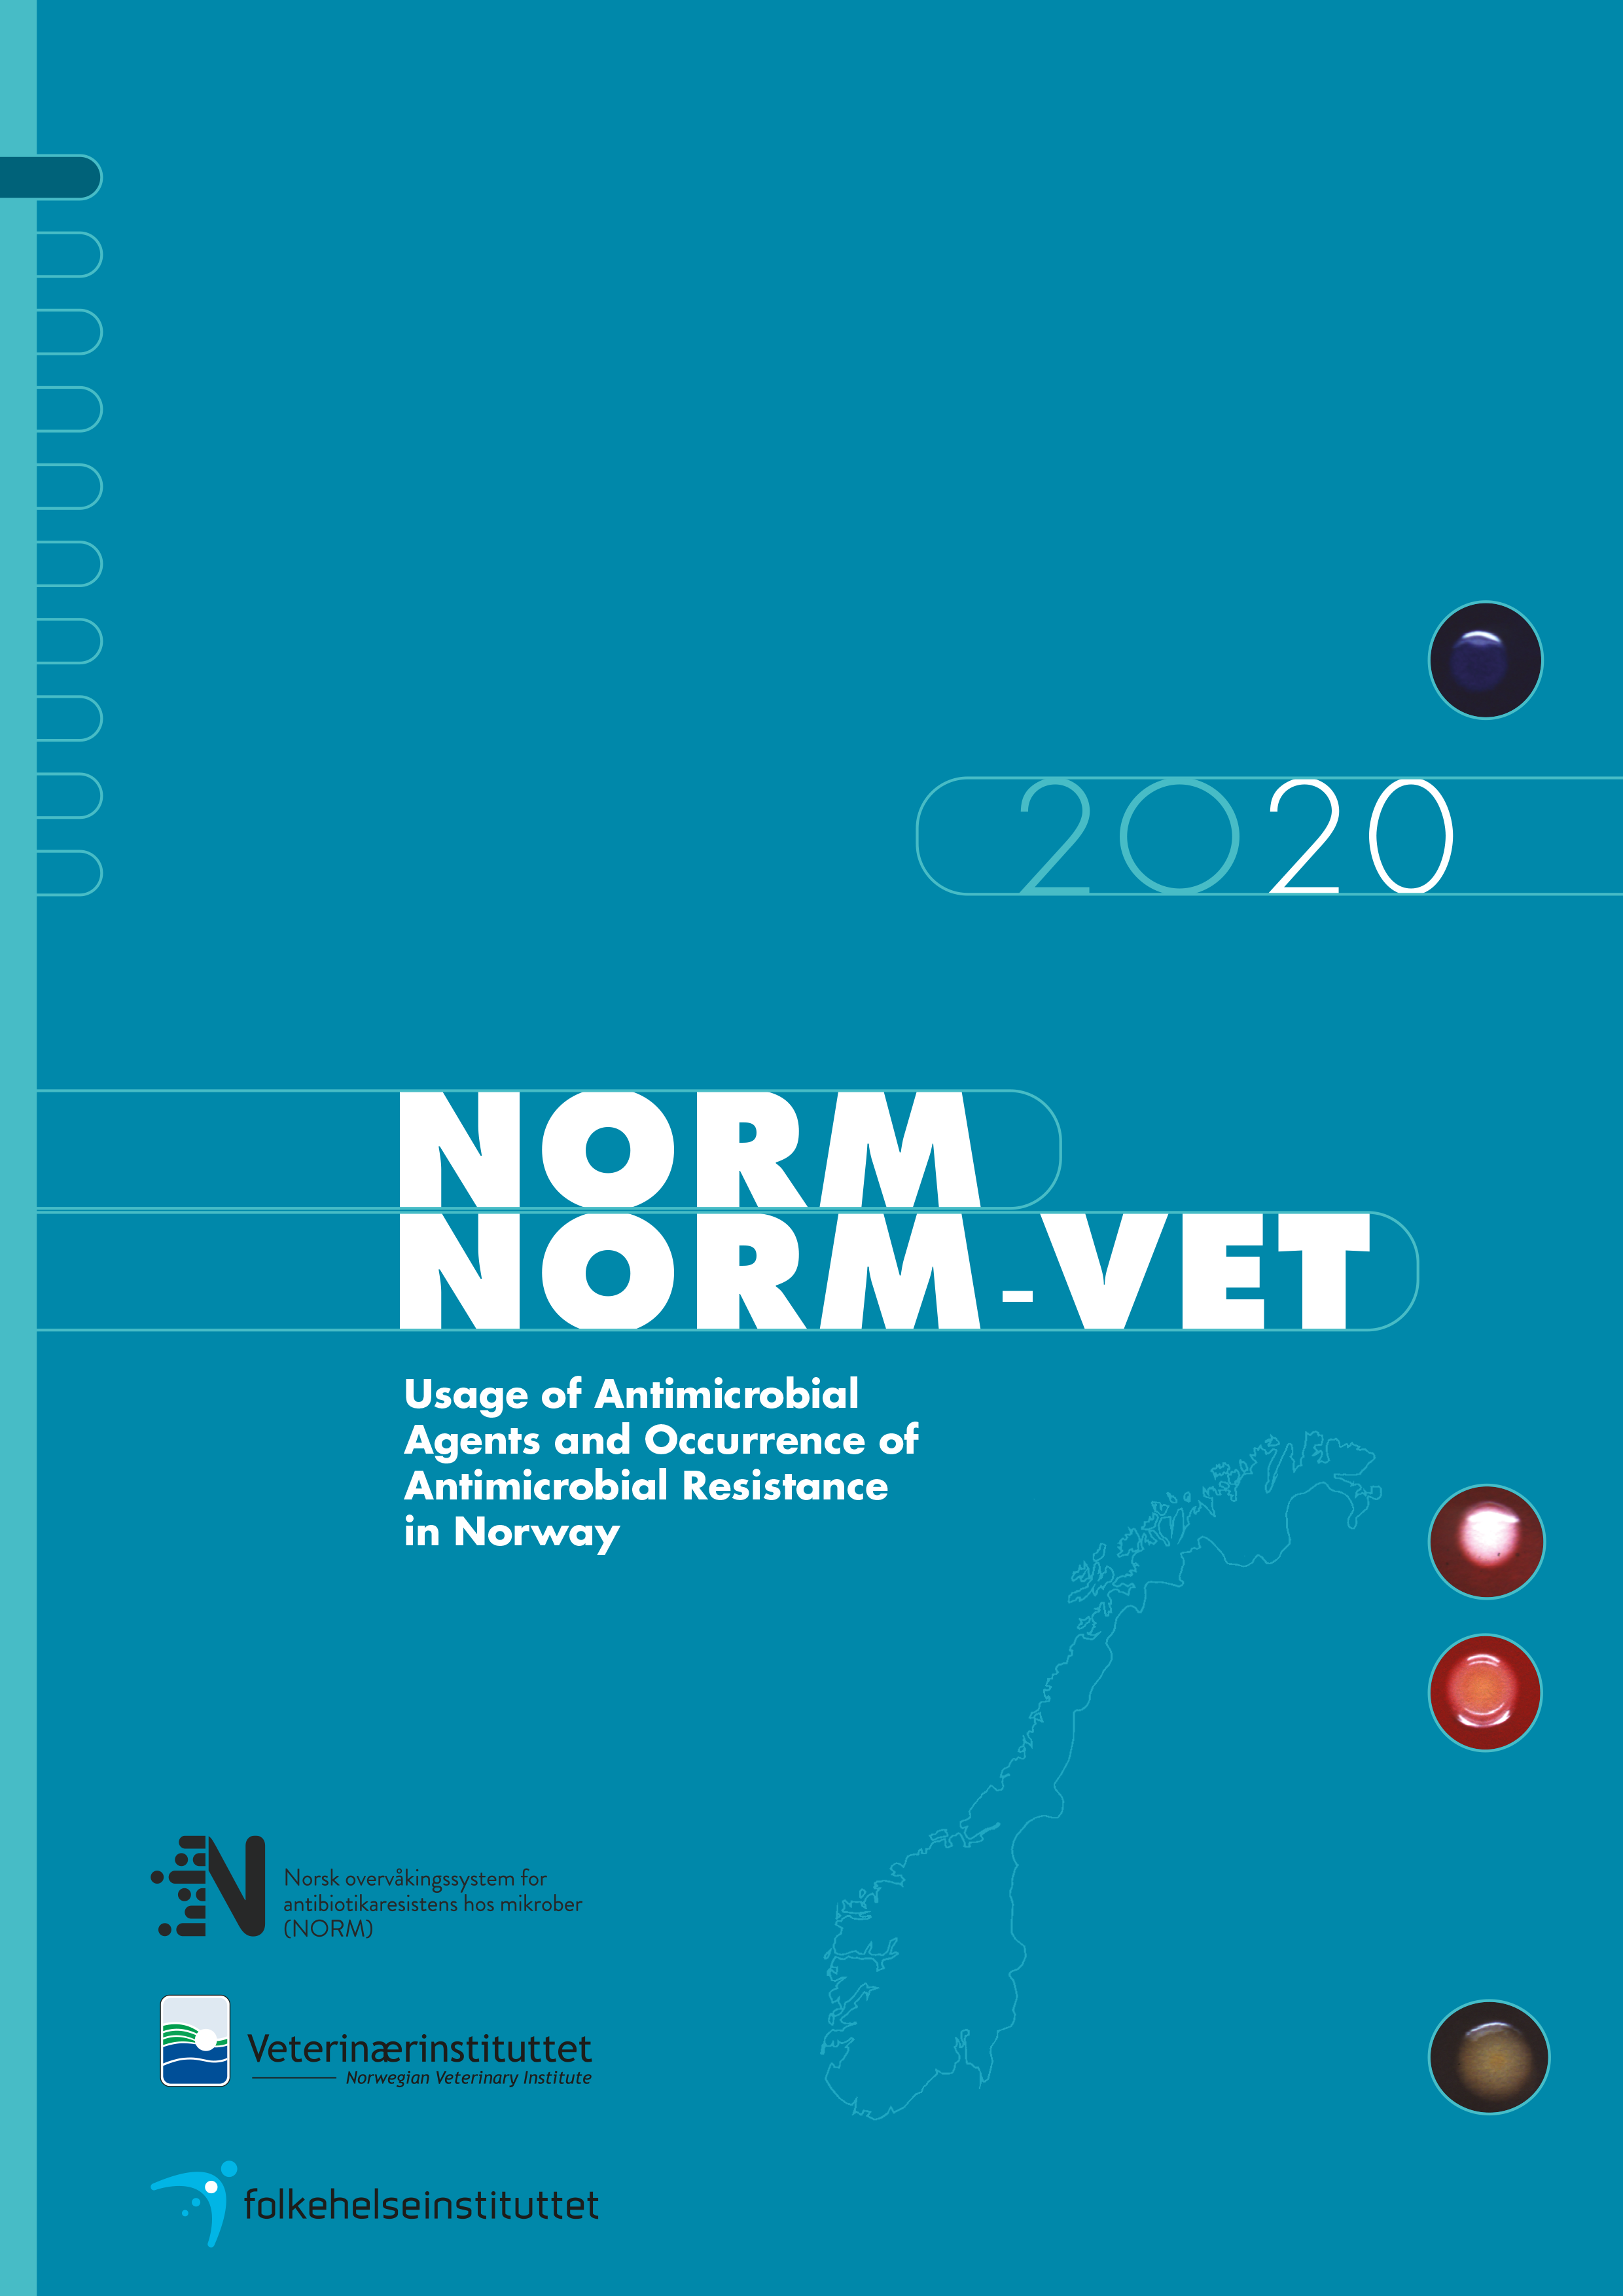 NORM og NORM-VET Usage of Antimicrobial  Agents and Occurrence of Antimicrobial Resistance  in Norway. 